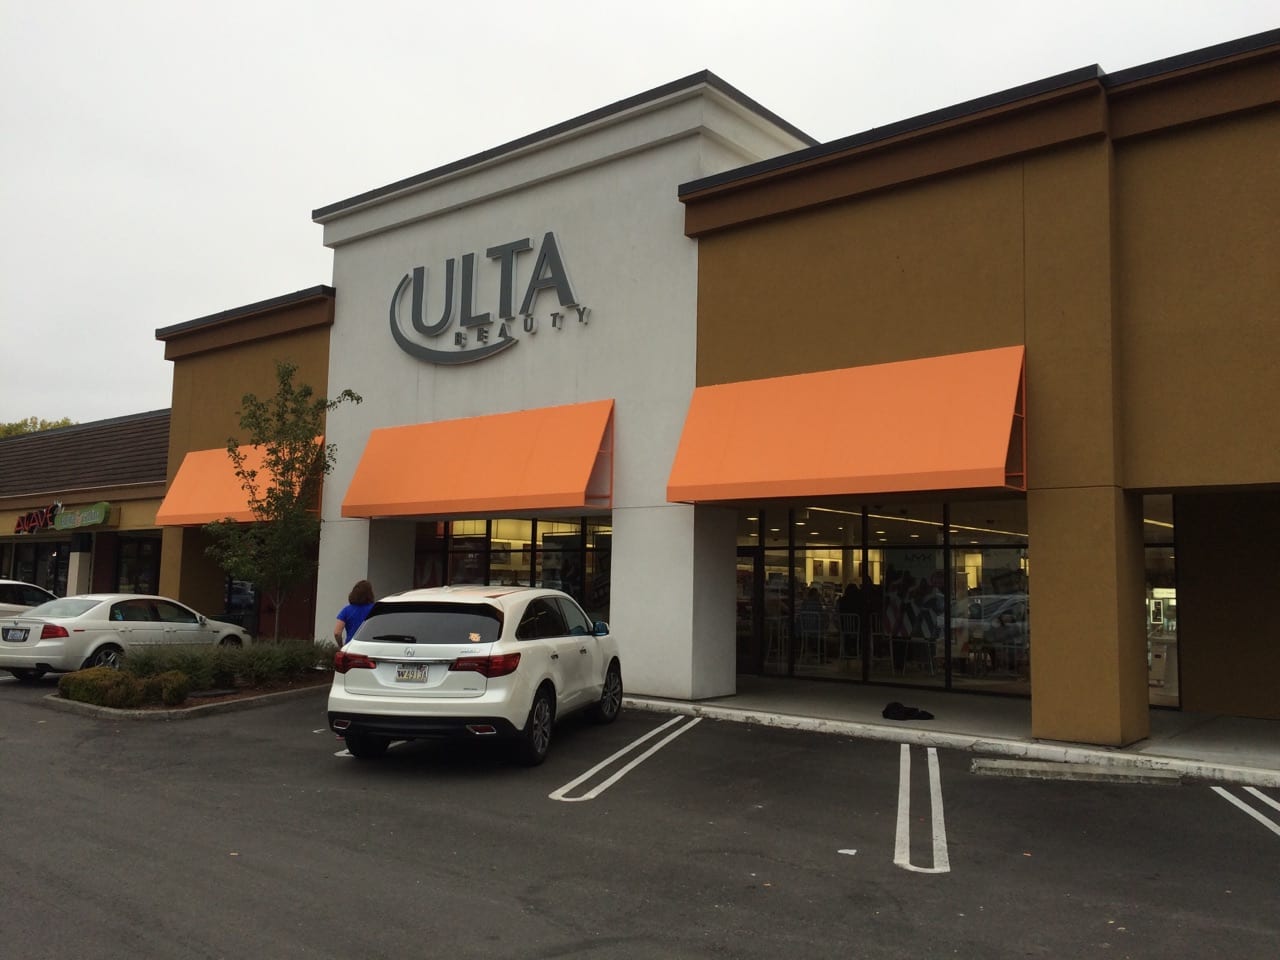 ulta retail storefront with cars parking in front and orange awnings